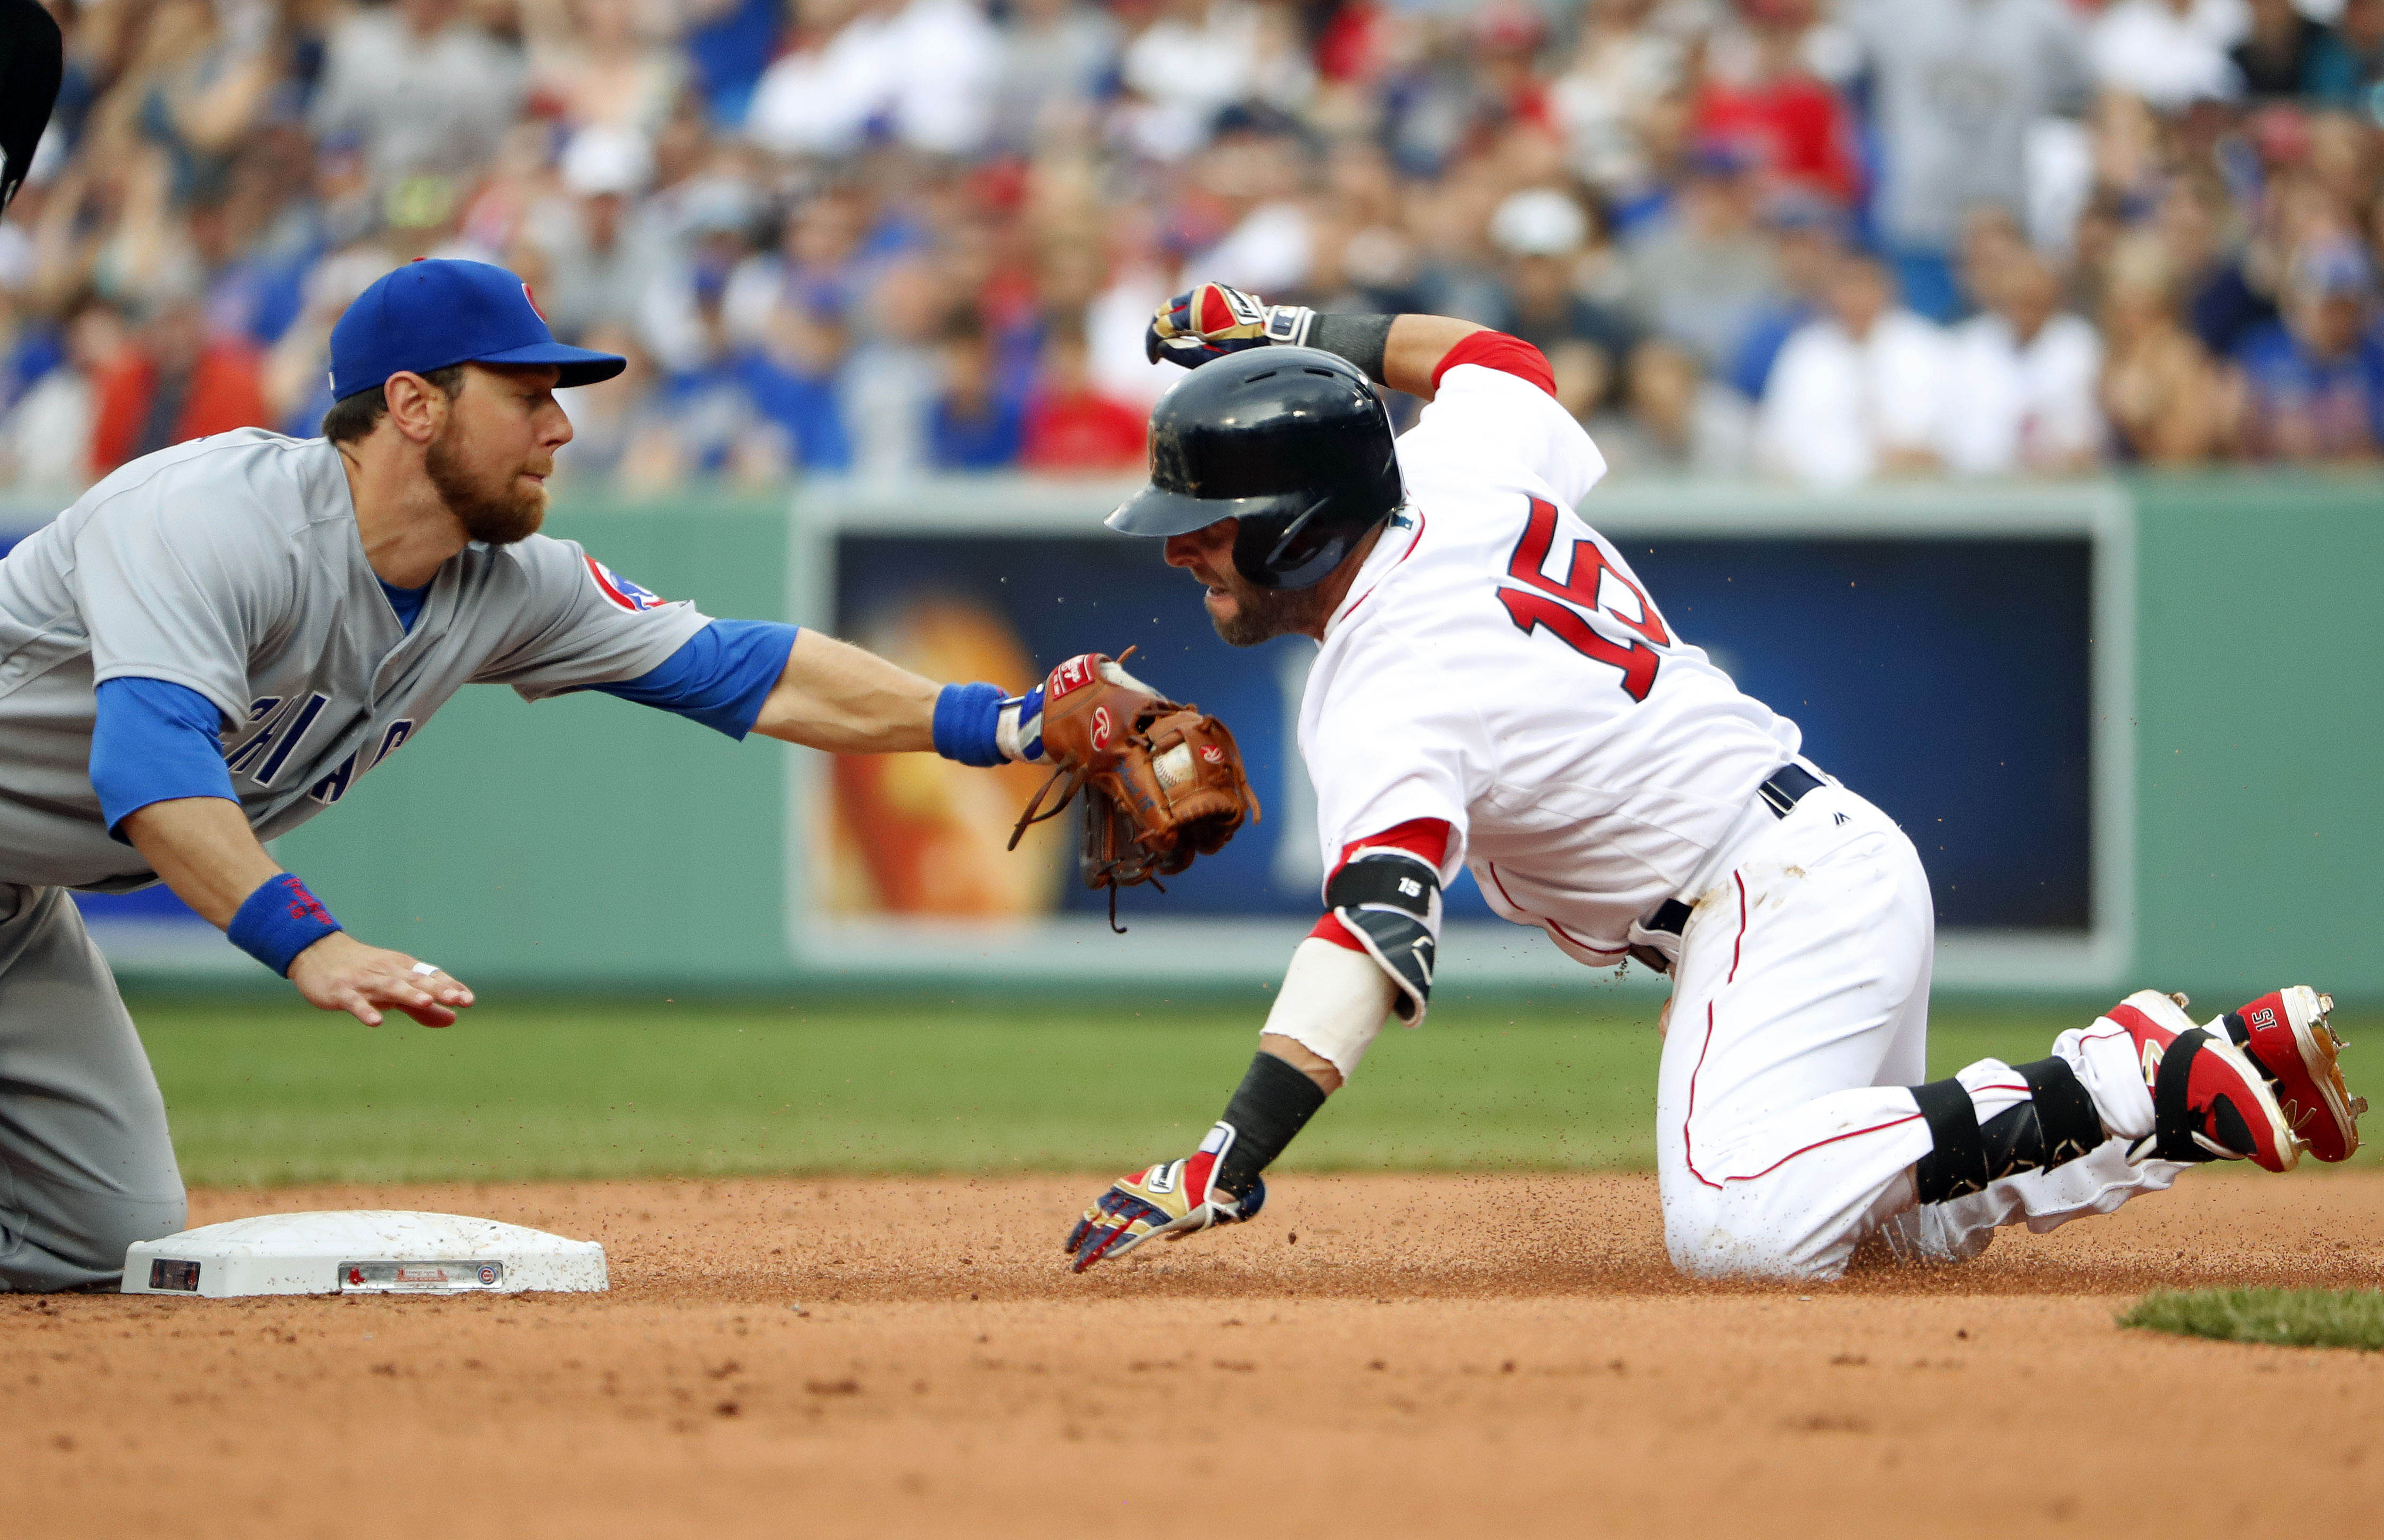 Chicago Cubs at Boston Red Sox Live Stream, First Pitch, TV Info, More